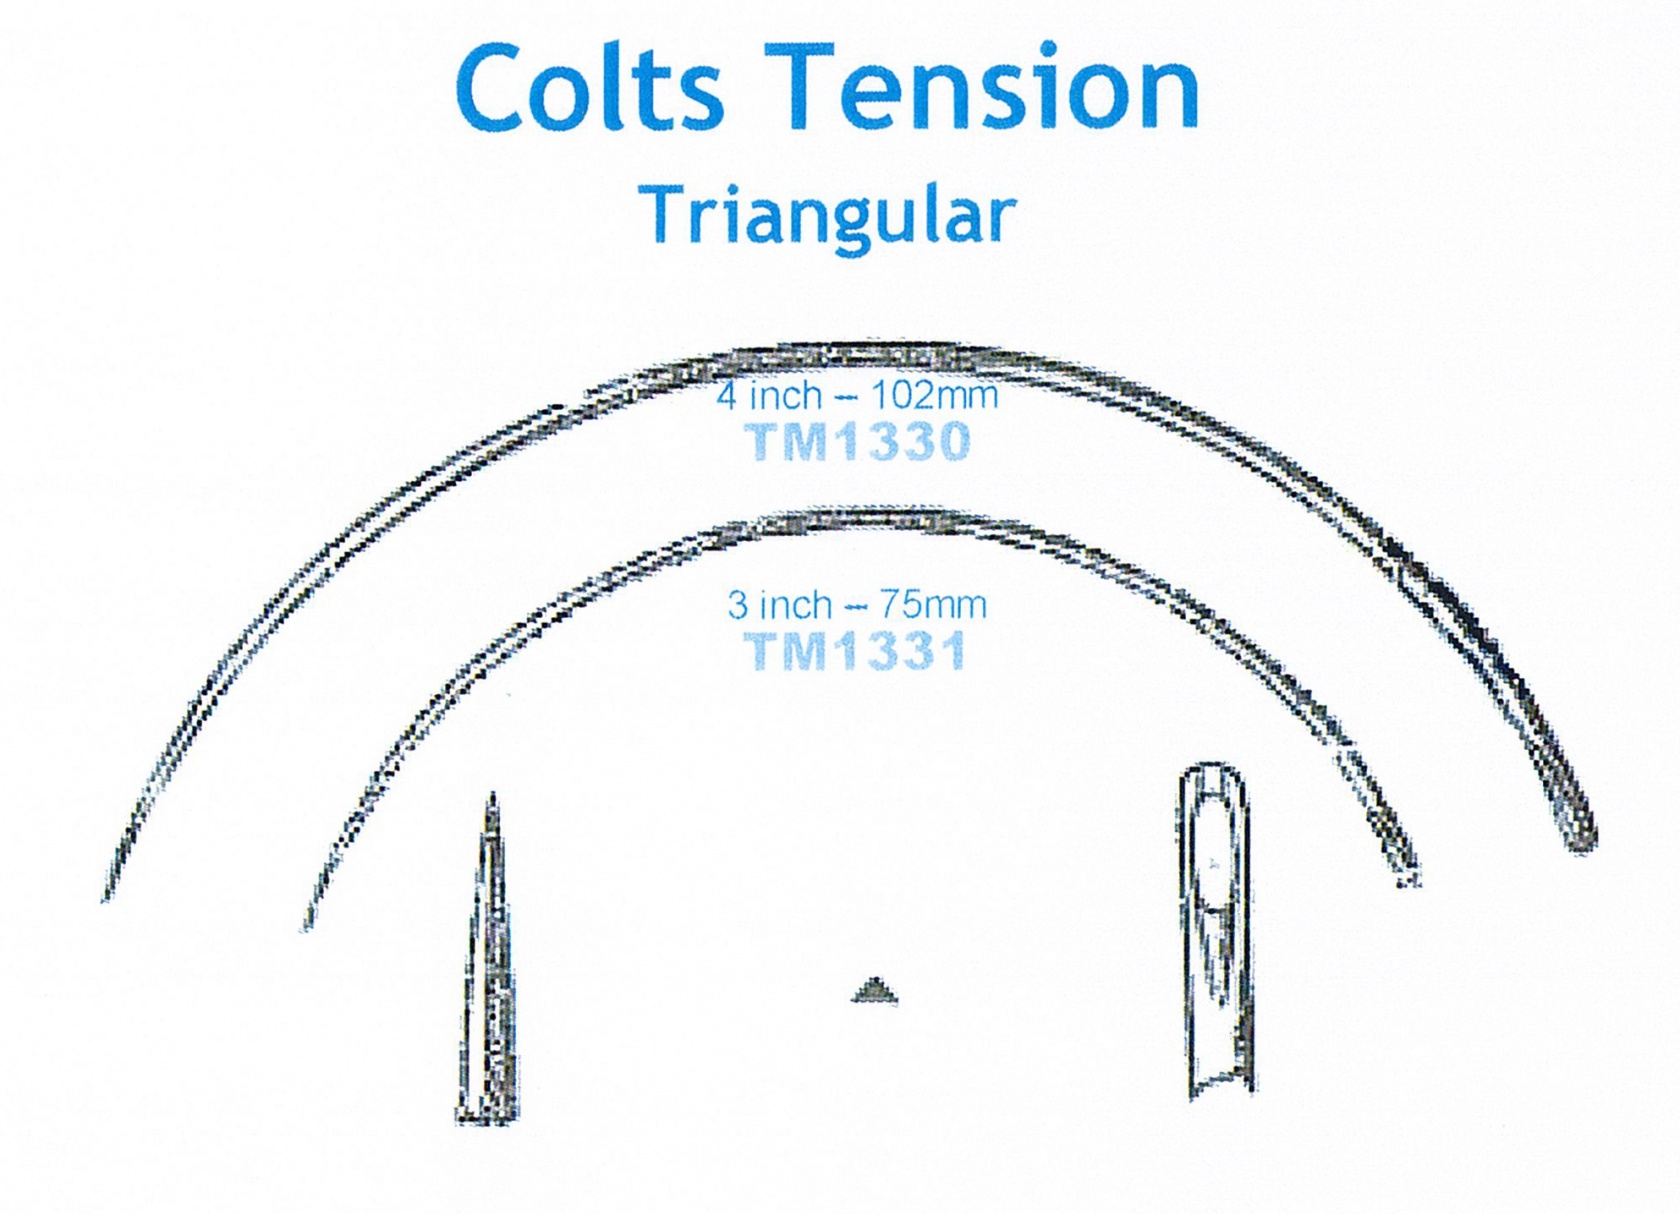 KAT-Eyed Colts Tension Triangular Needle 4 inch Pkt of 2